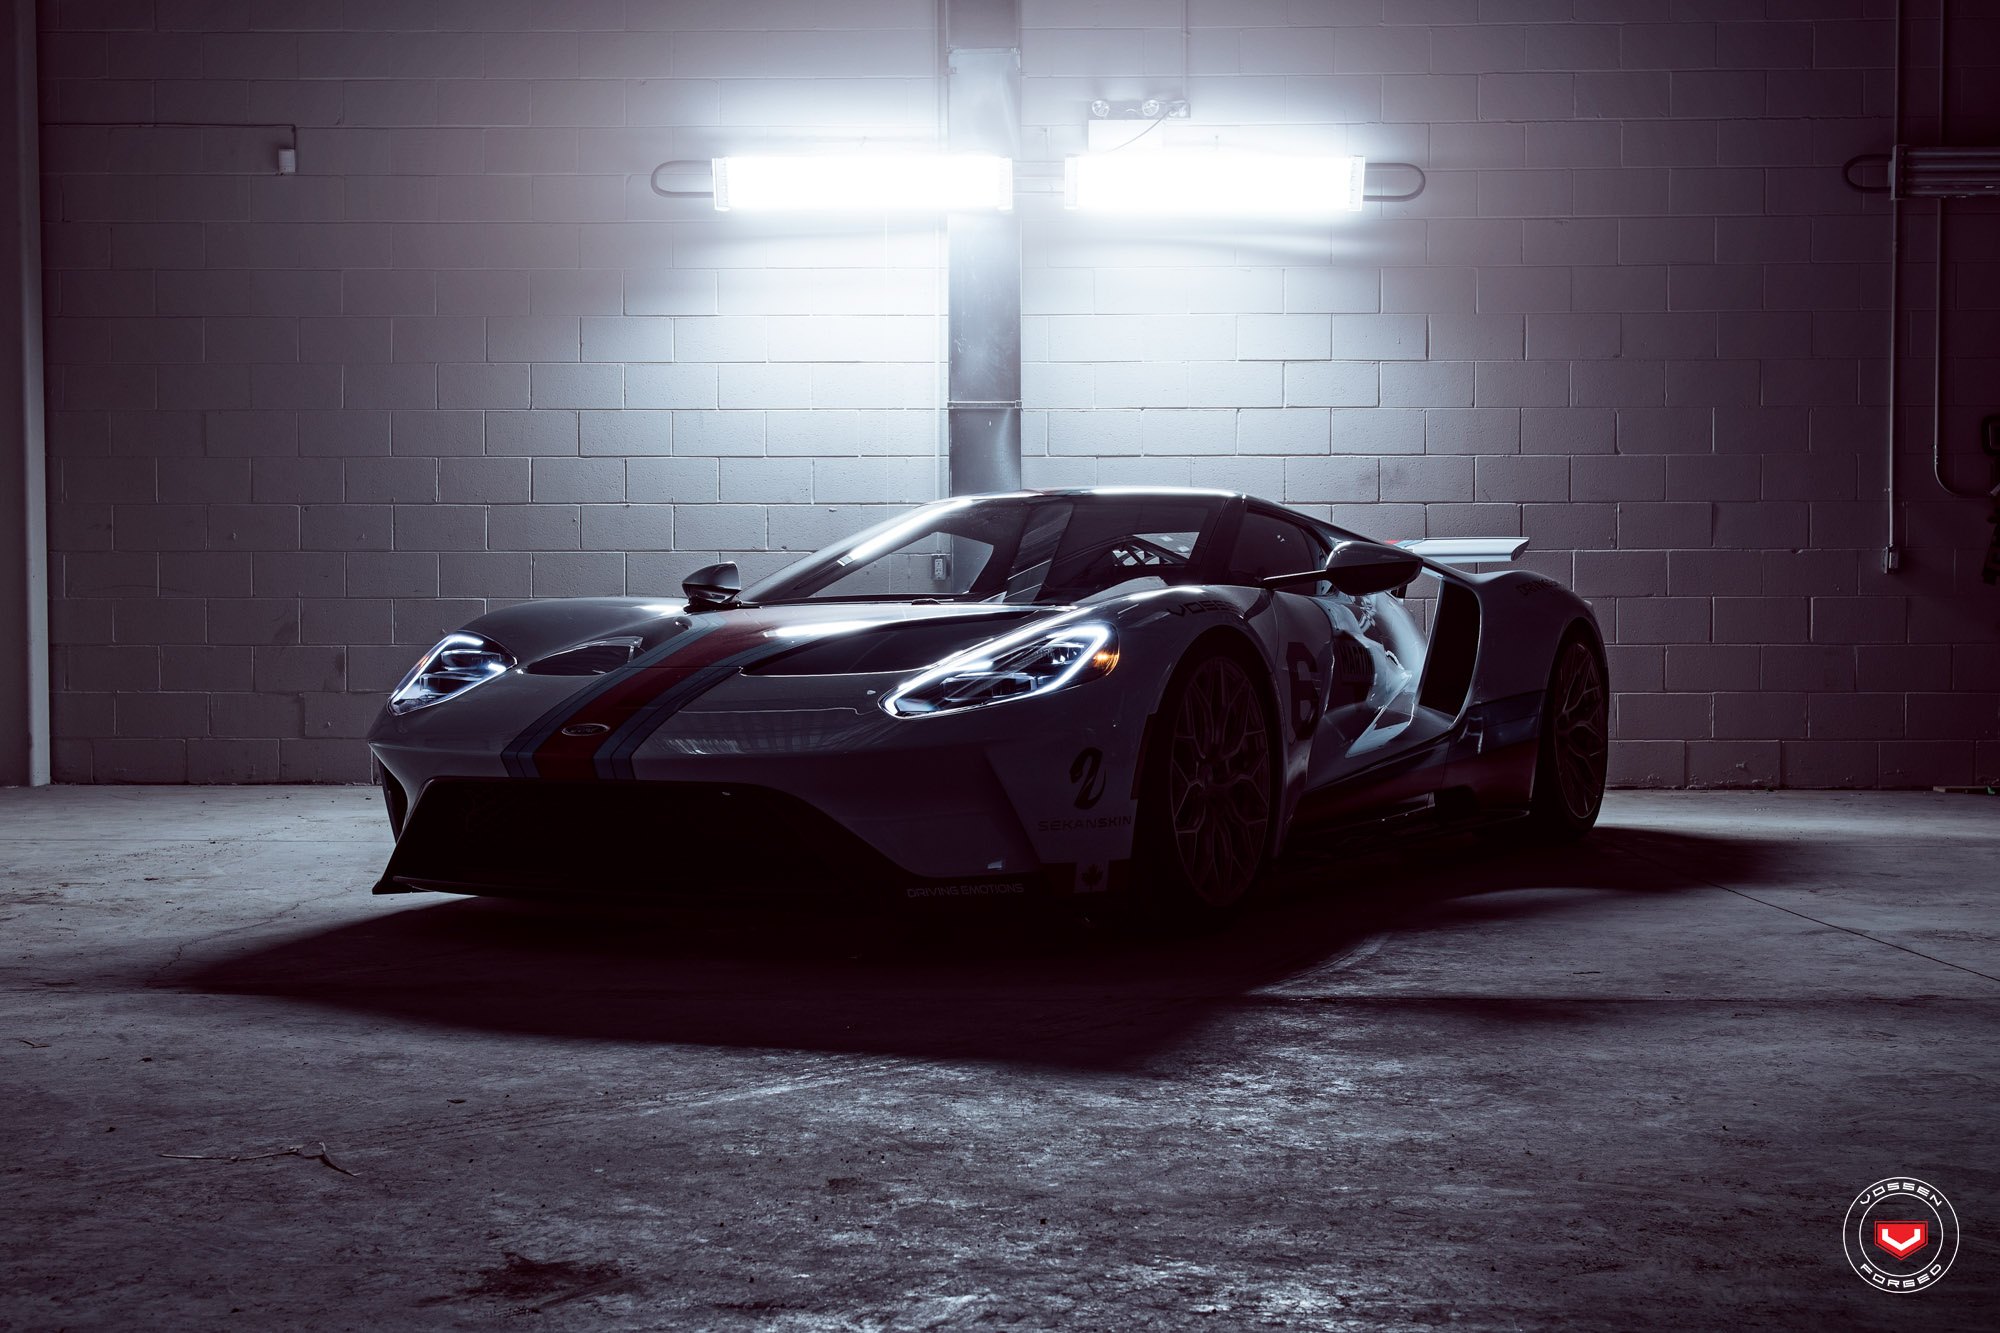 White Debadged Ford GT with Aftermarket Headlights  - Photo by Vossen